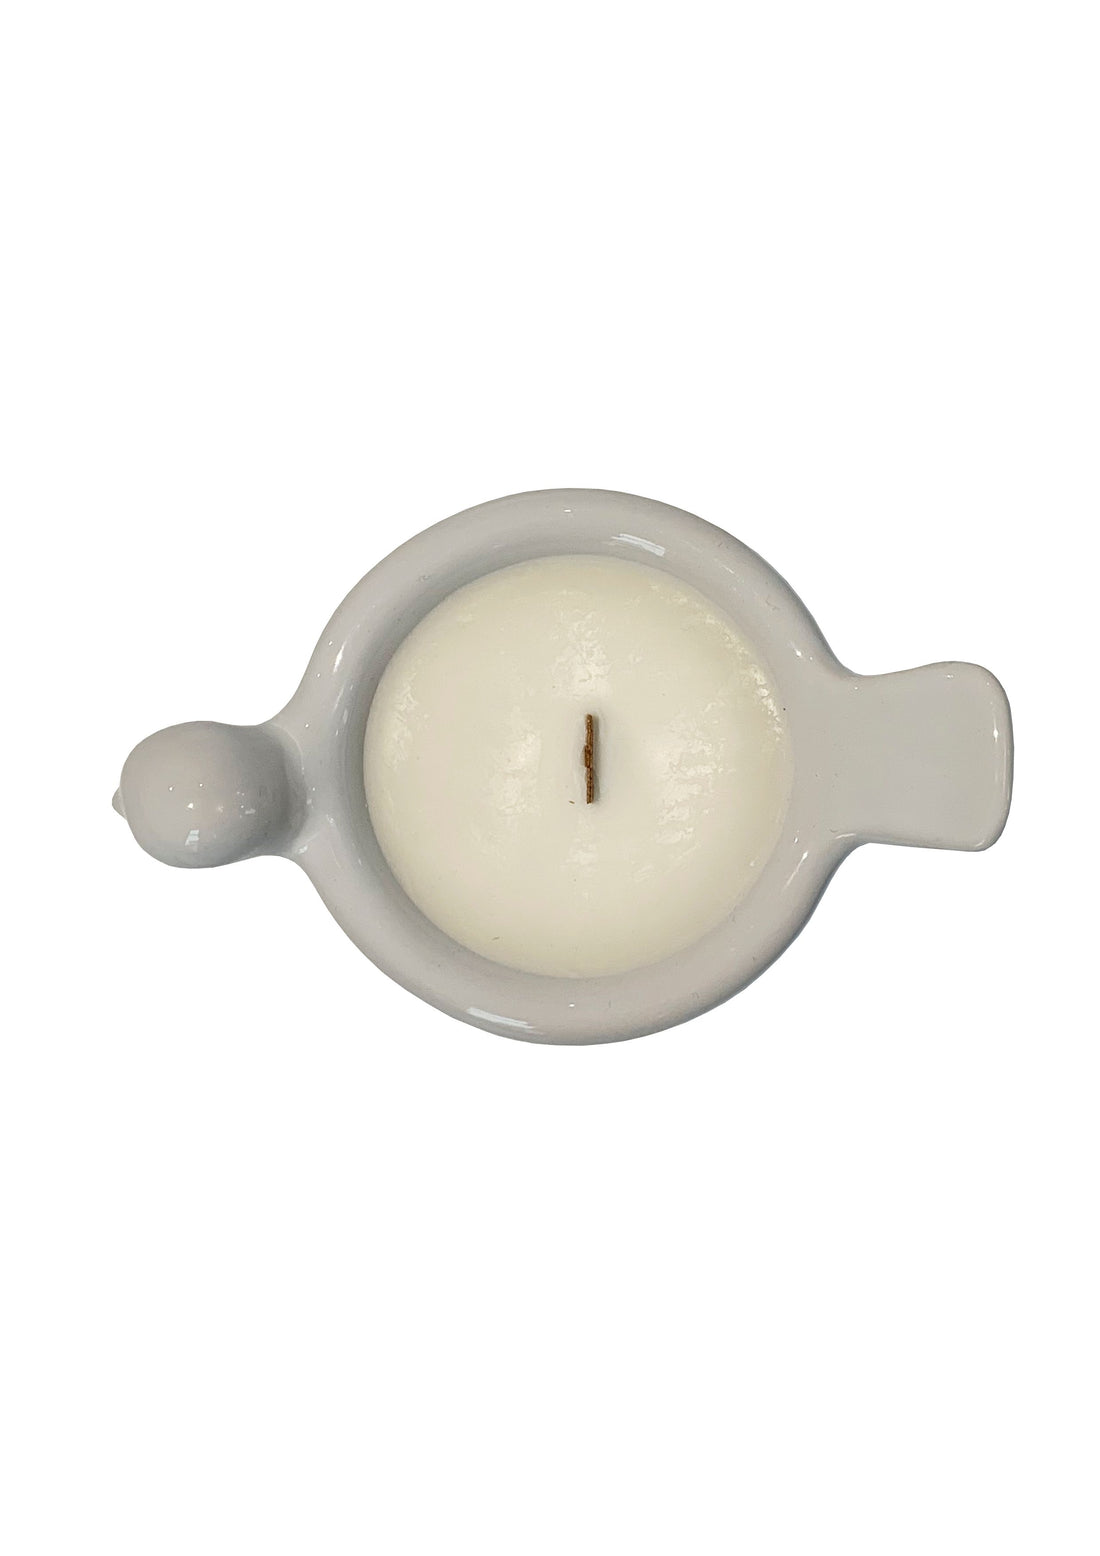 White Blossom Candle